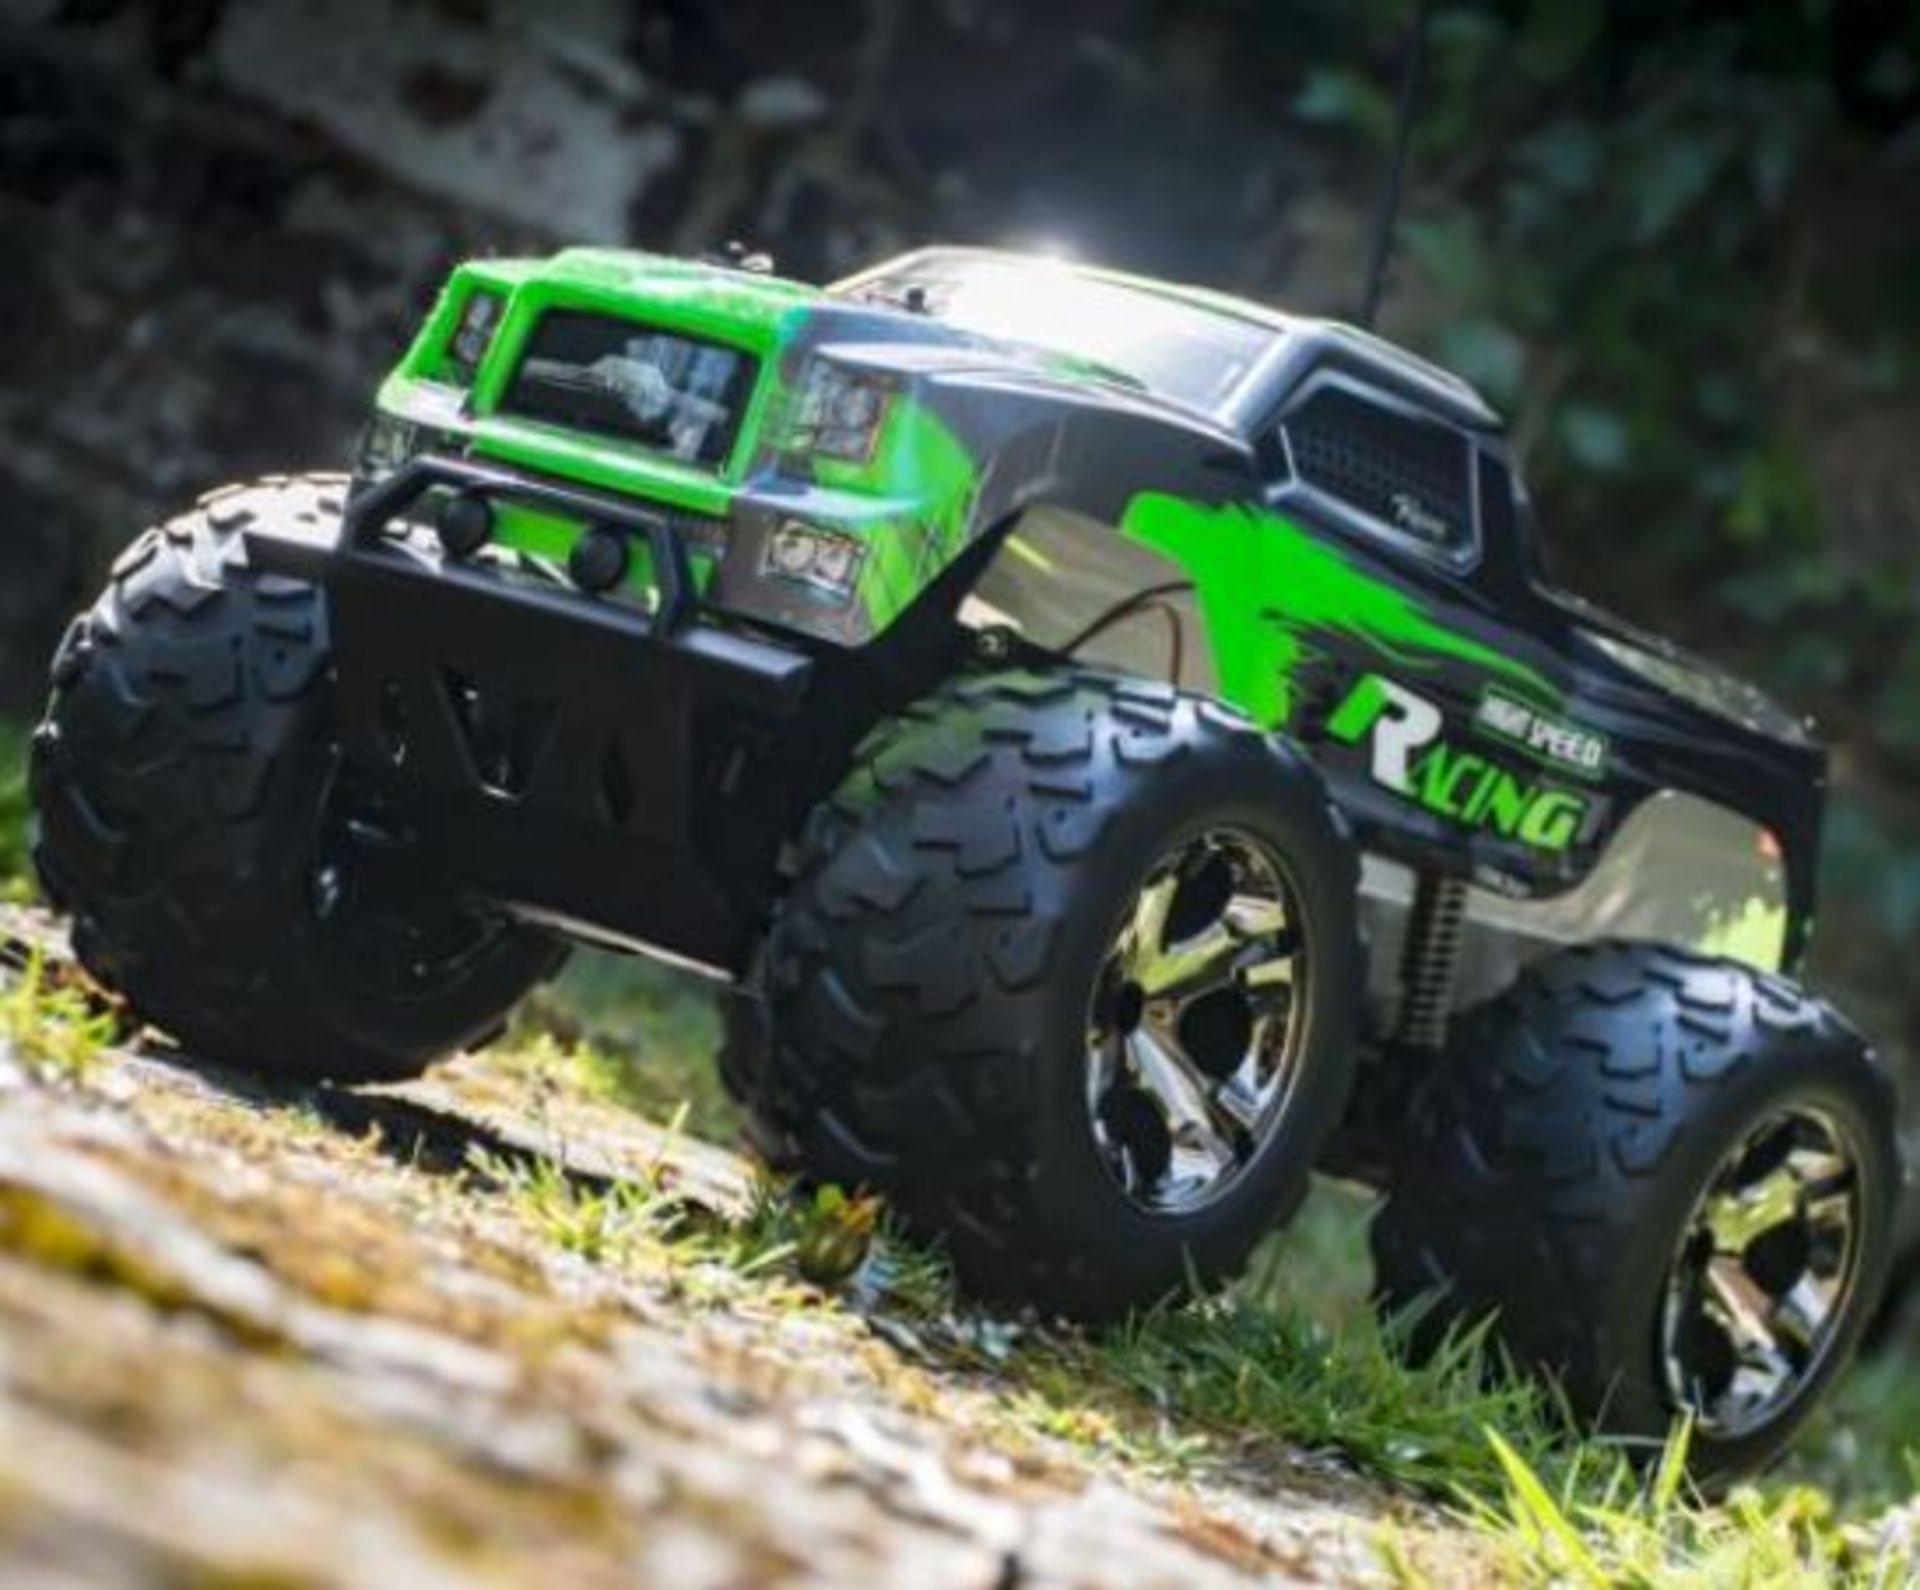 (P) 7x Red5 RC Racing Truck Green RRP £60 Each. (All Units May Have RTM Sticker)